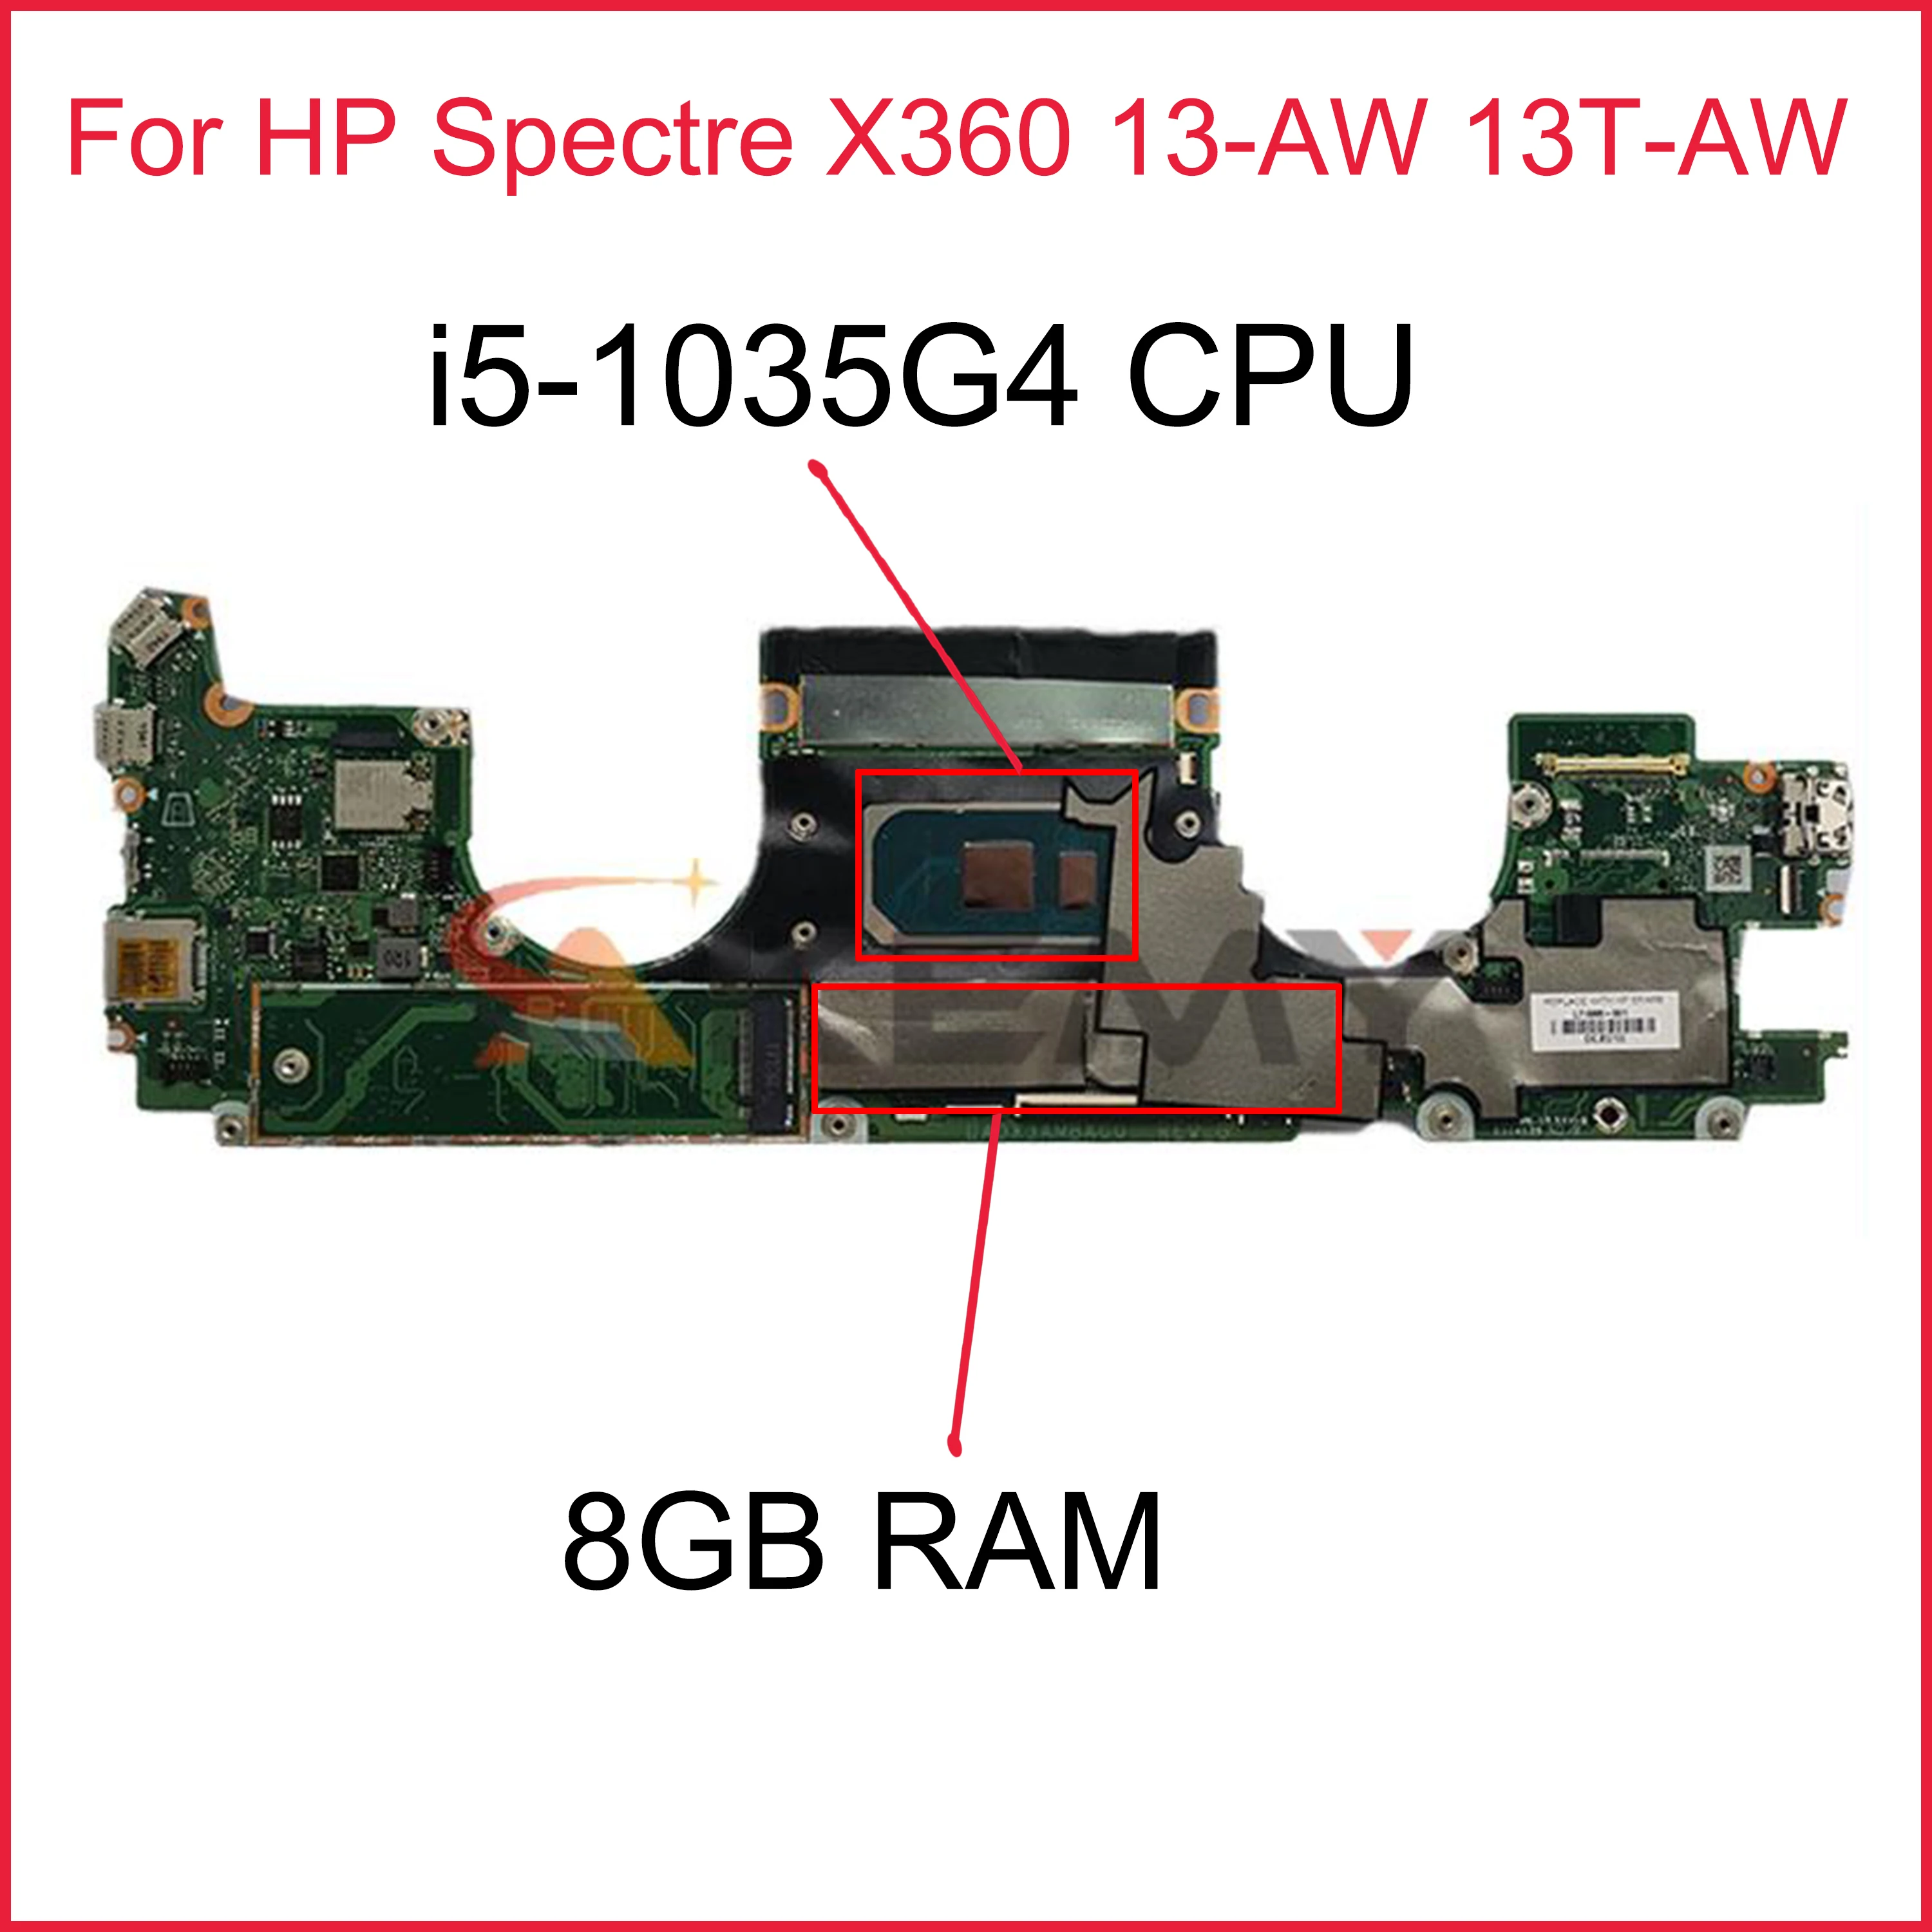 

For HP Spectre X360 13-AW 13T-AW Laptop Motherboard M03271-001 DA0X3AMBAG0 M03271-601 With i5-1035G4 8GB RAM Fully Tested